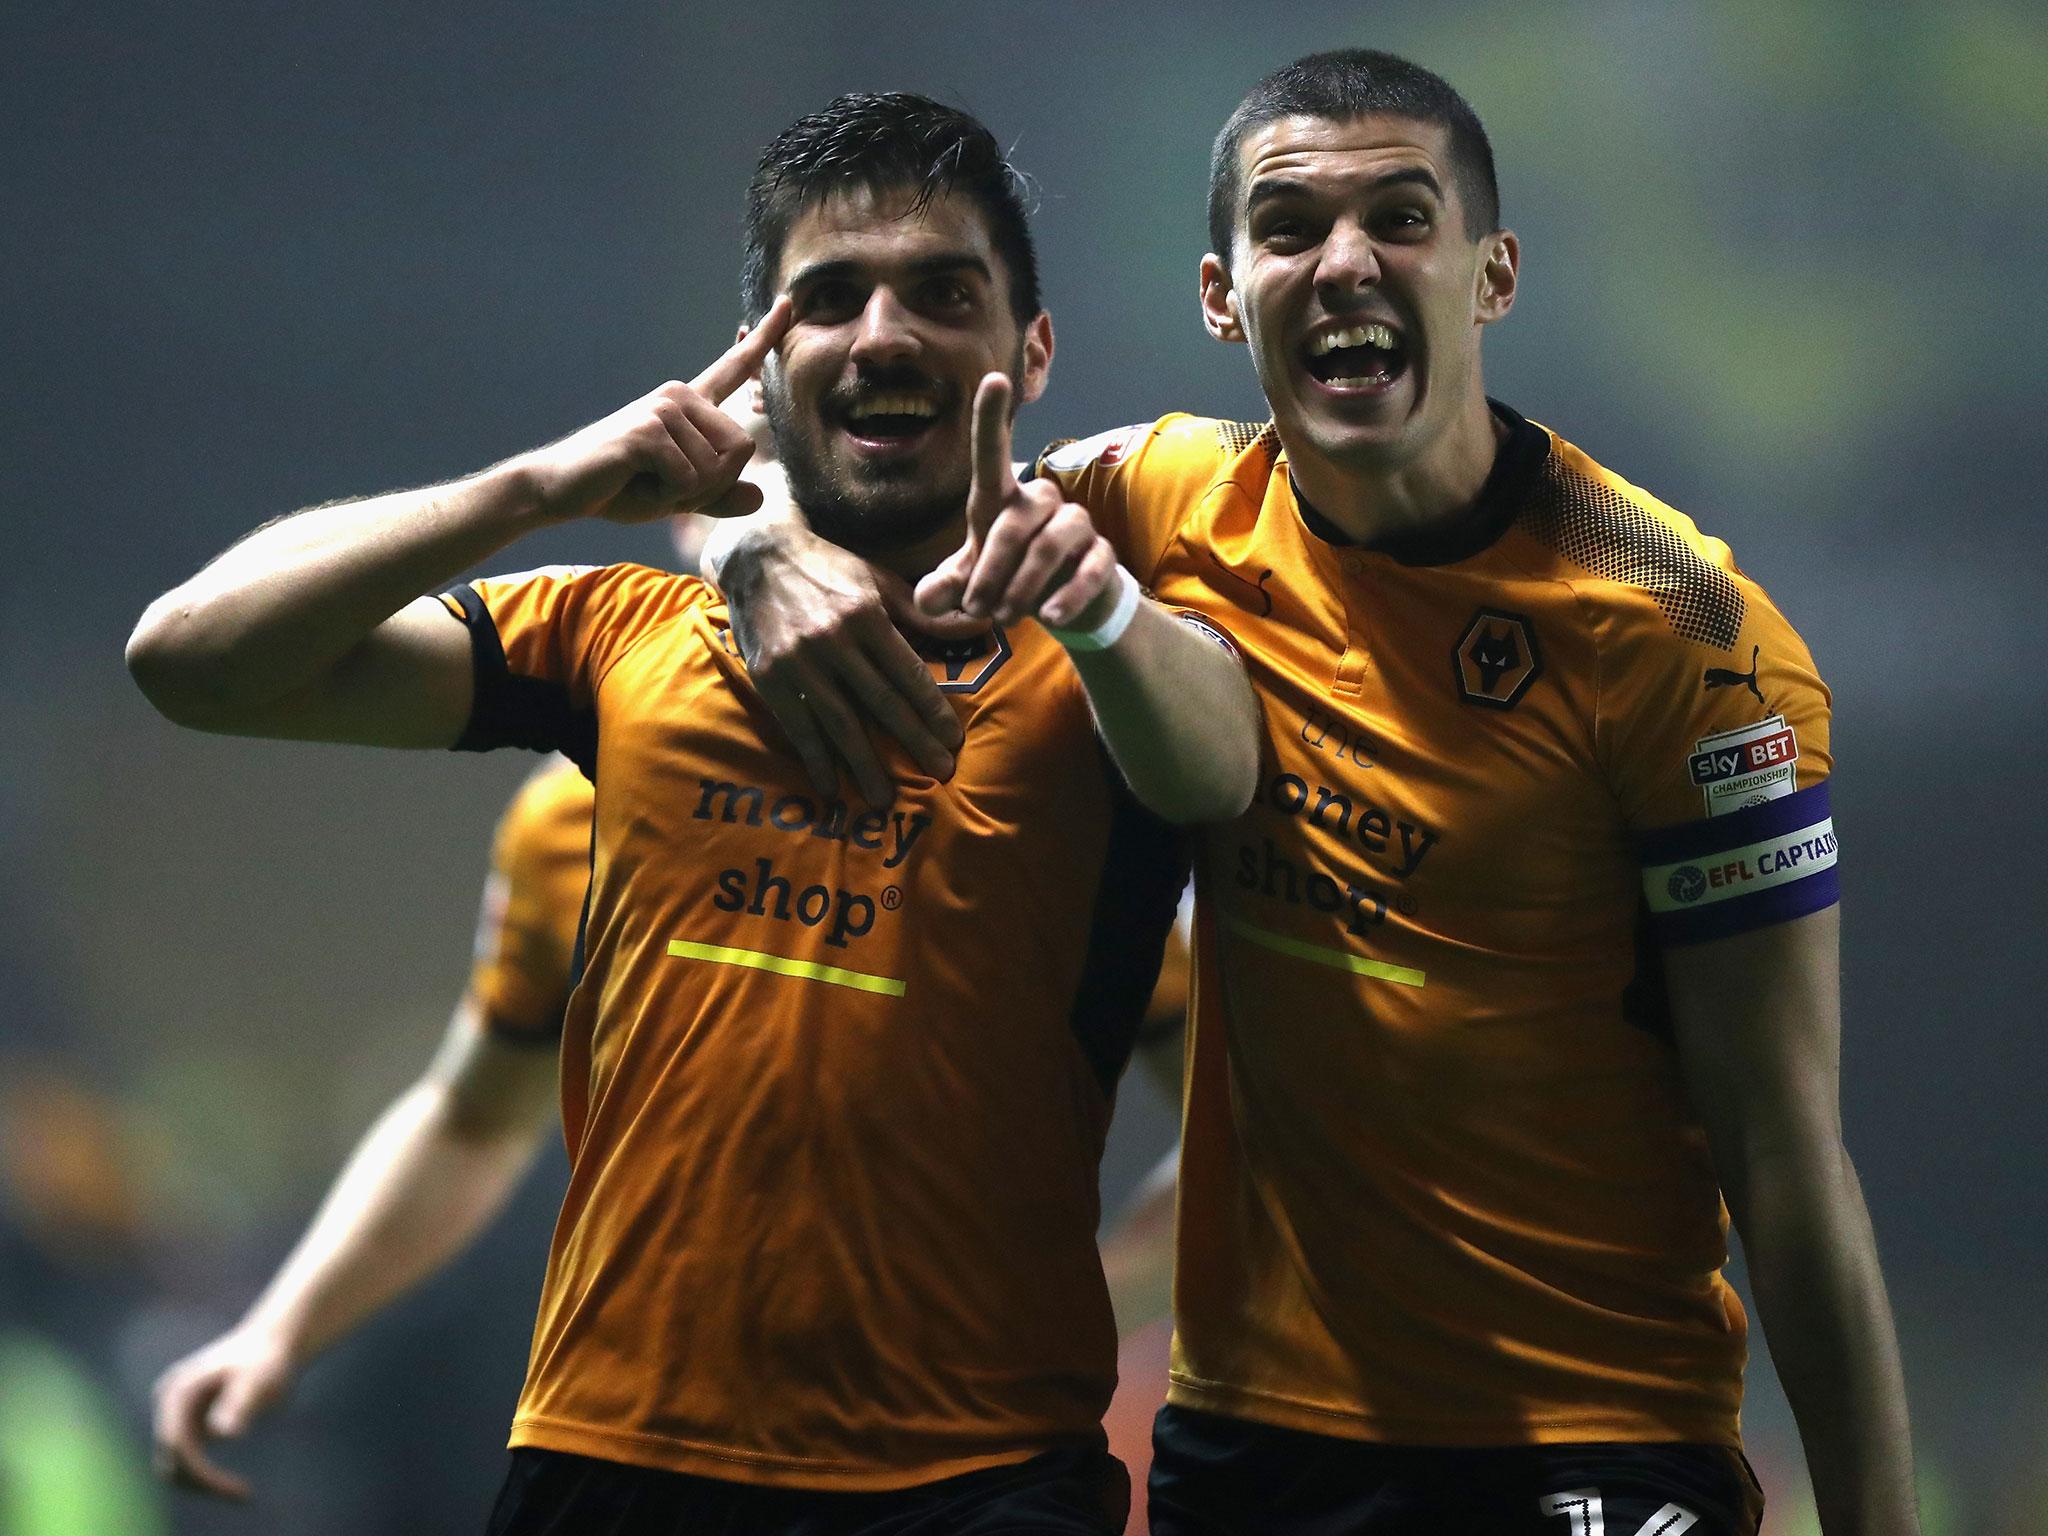 The victory over Derby has given Wolves a massive 11-point lead over second-placed Fulham